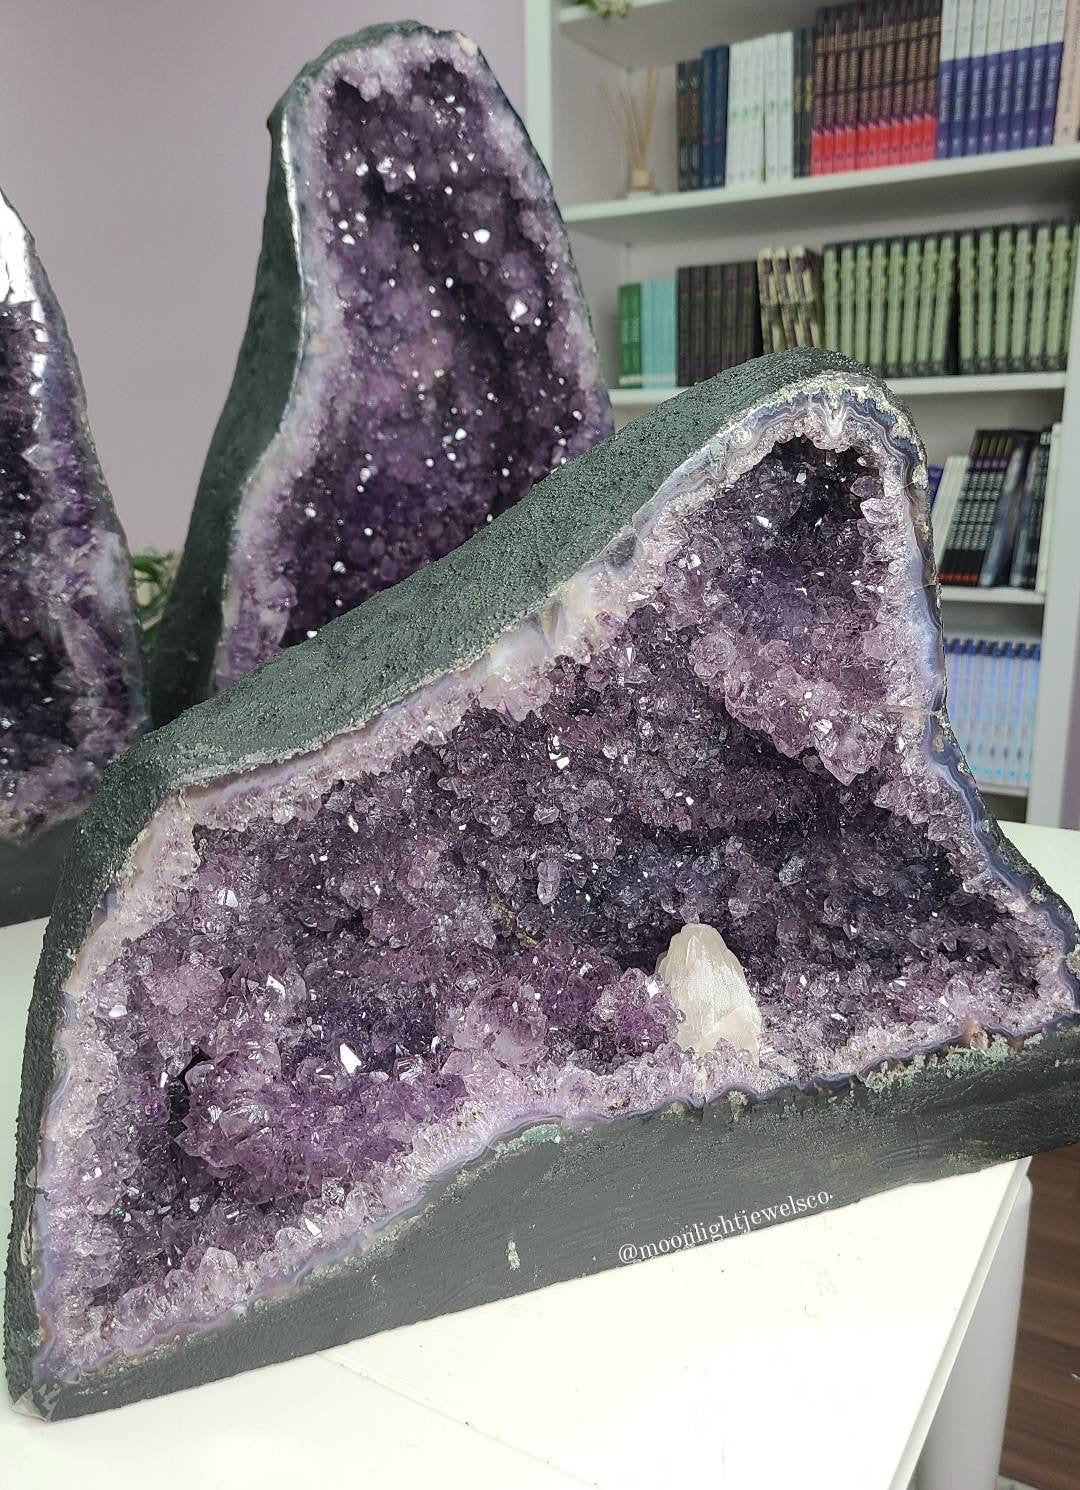 18.75 KG Amethyst Cathedral with Calcite Inclusion, Micro Druzy and Amethyst "Flowers" (see photo 3)